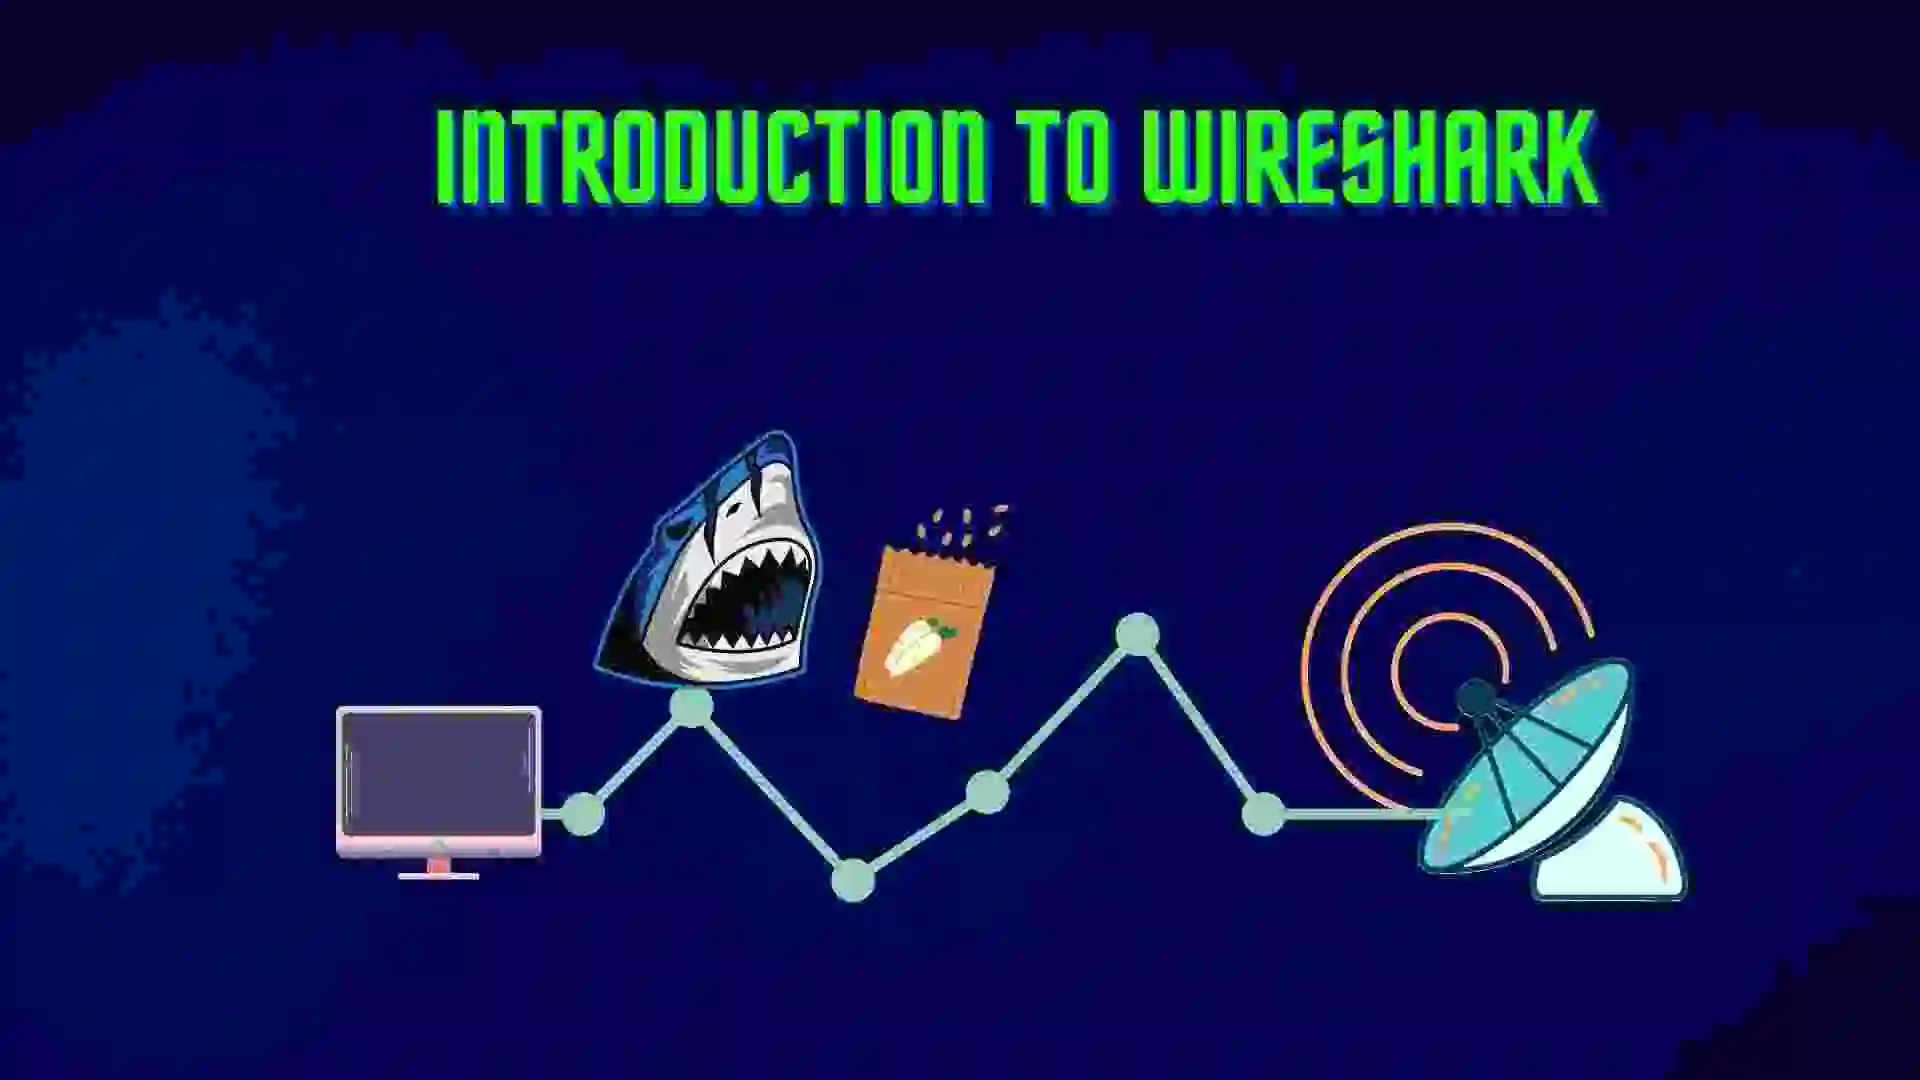 Wireshark Introduction and How to Install in your system